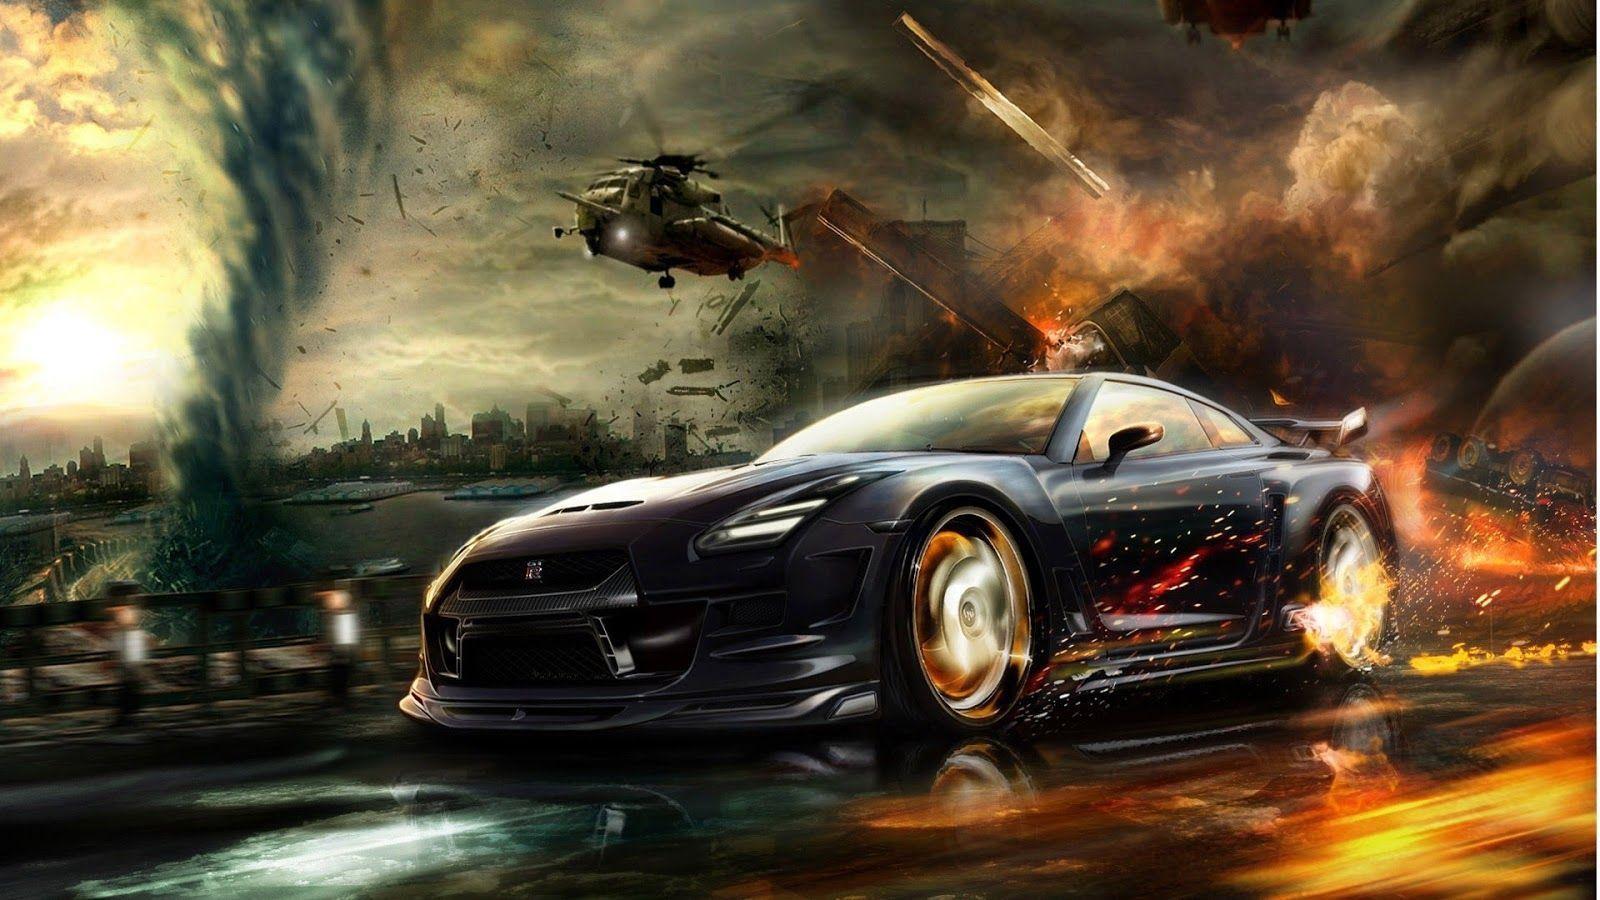 Cool Race Car Wallpaper From Car Race Games 1680×1050 NO29